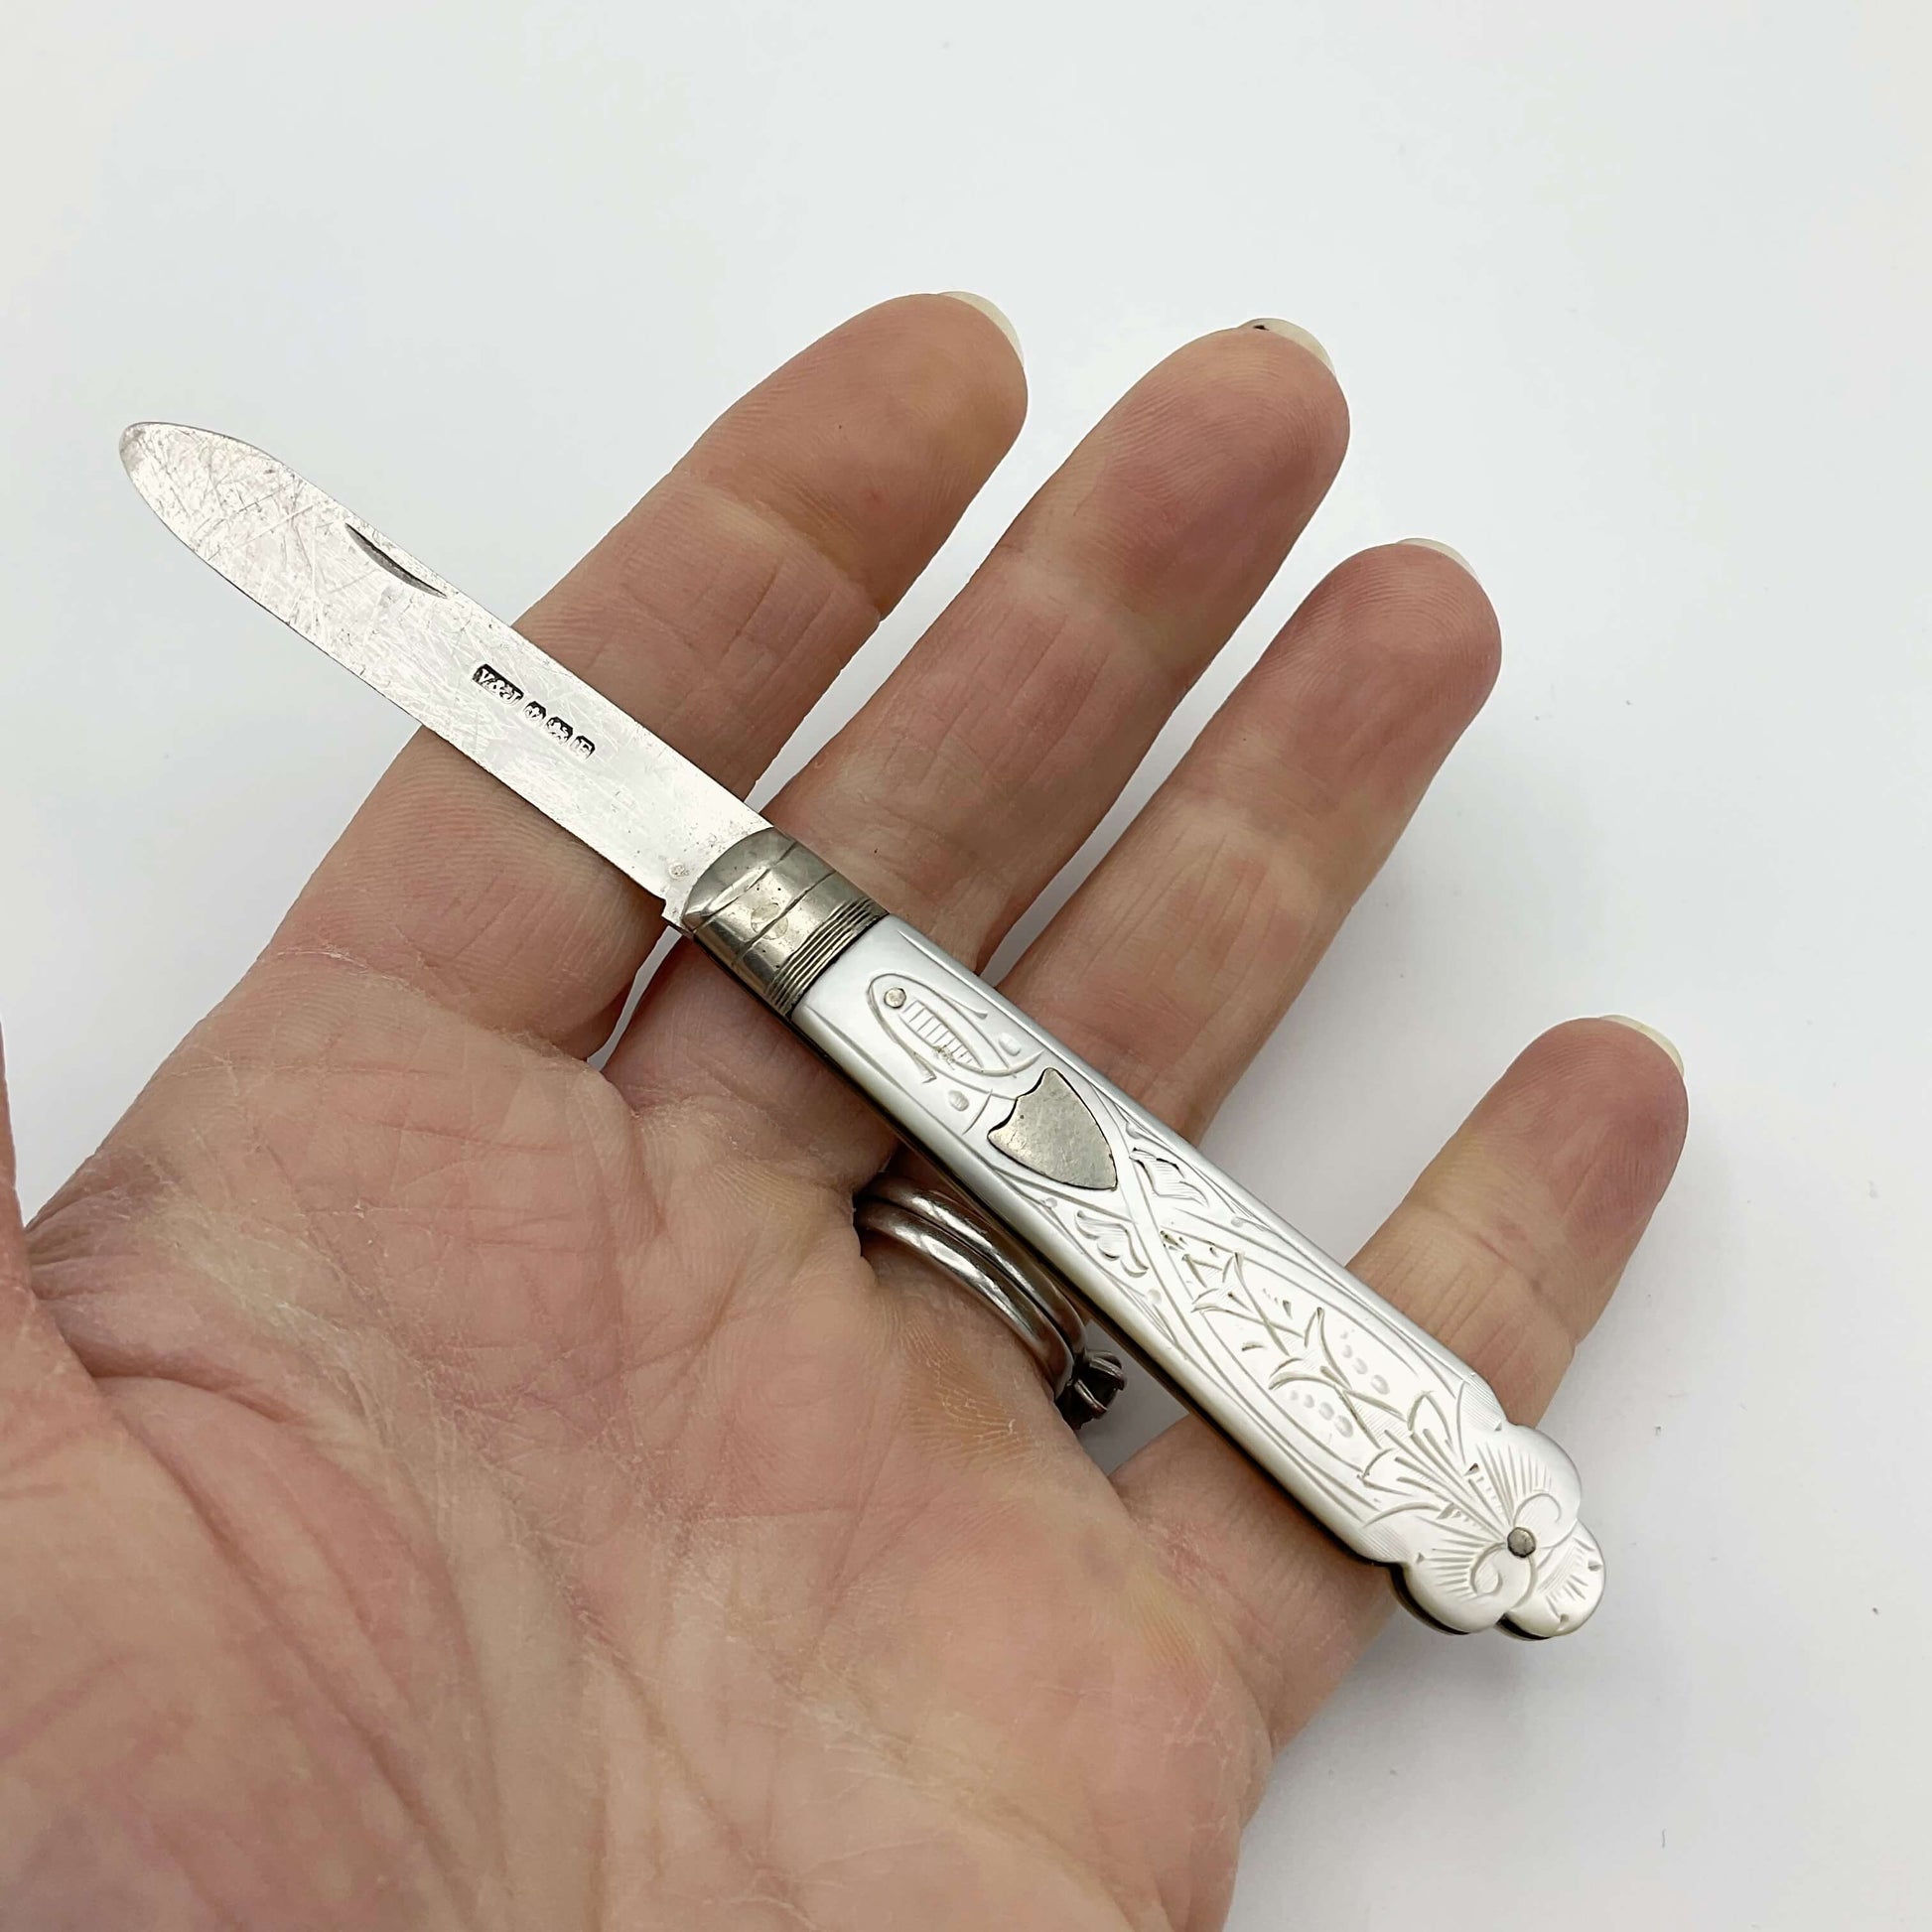 Vintage silver fruit knife with a beautifully engraved mother of pearl handle held in a hand